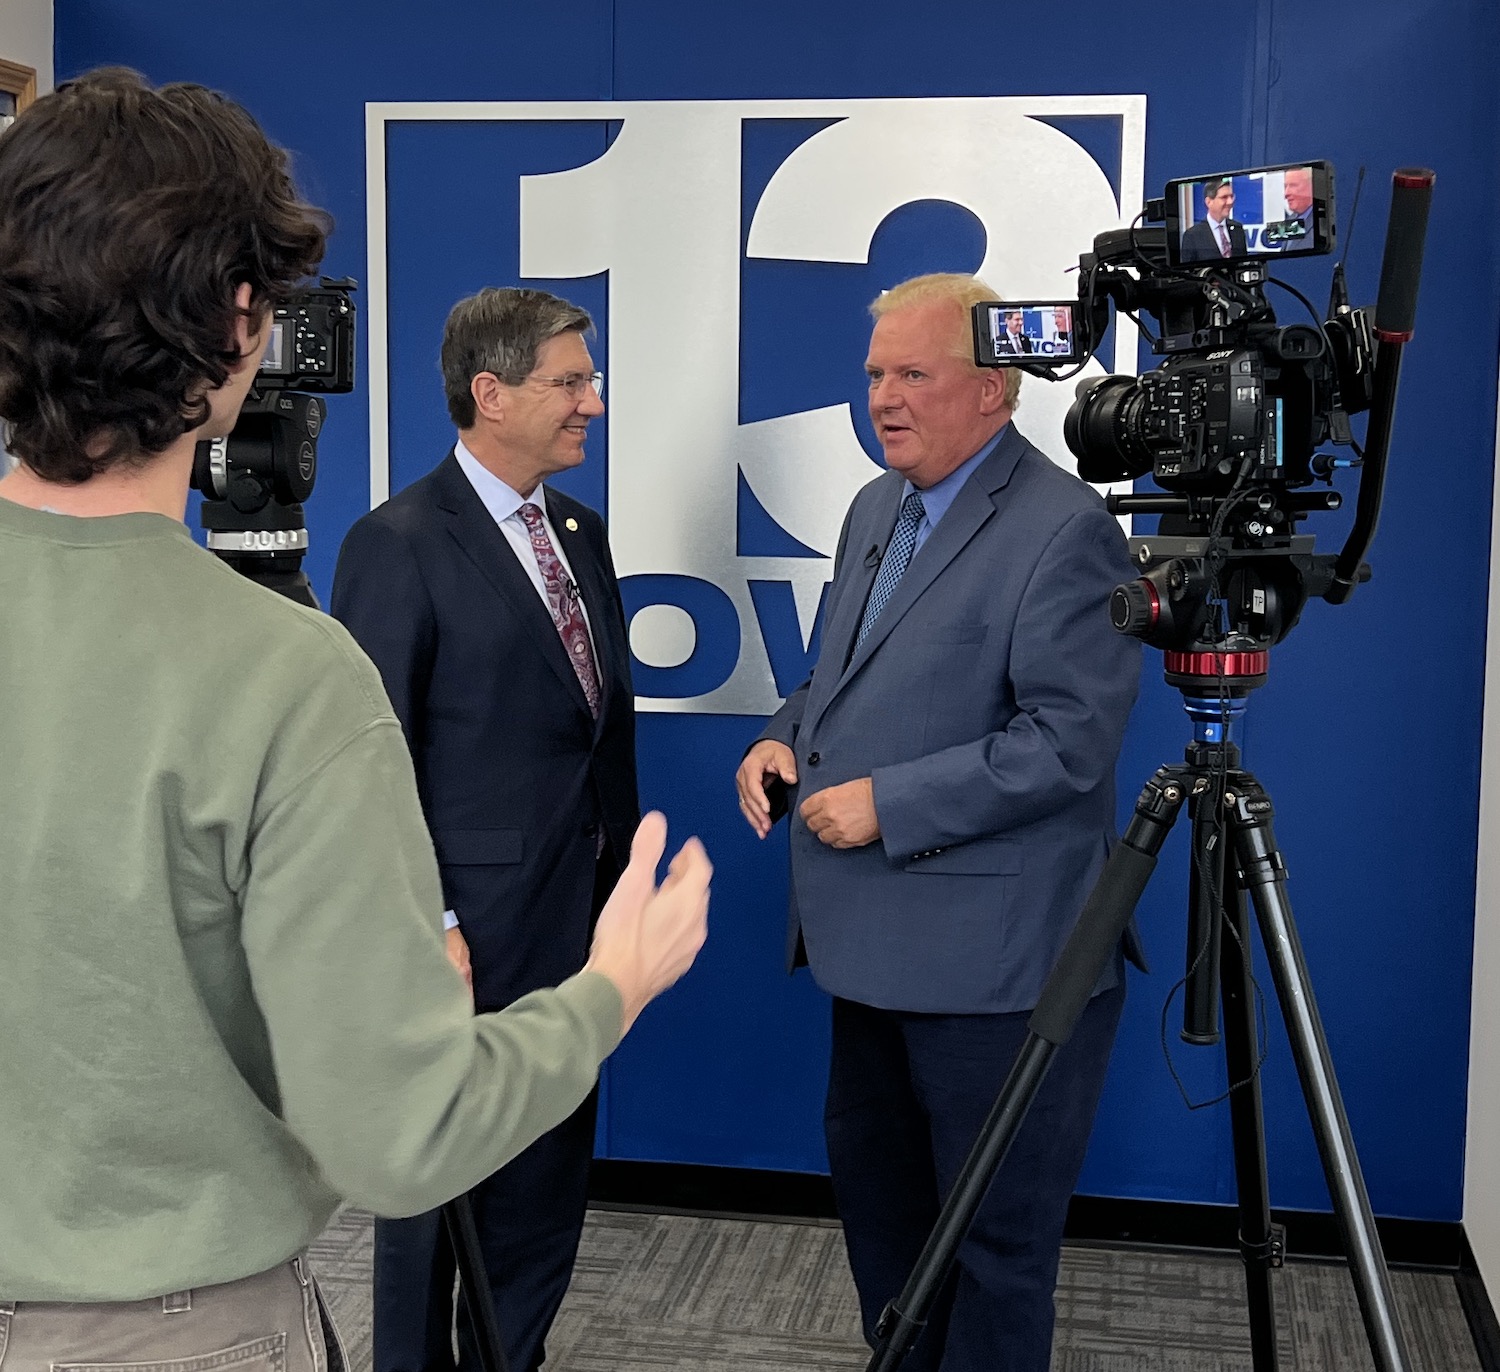 WVSOM President James Nemitz stands with Mark Curtis, host of WOWKTV's "Inside West Virginia Politics" to do a TV interview about the WVSOM Pre-Osteopathic Medicine Program.